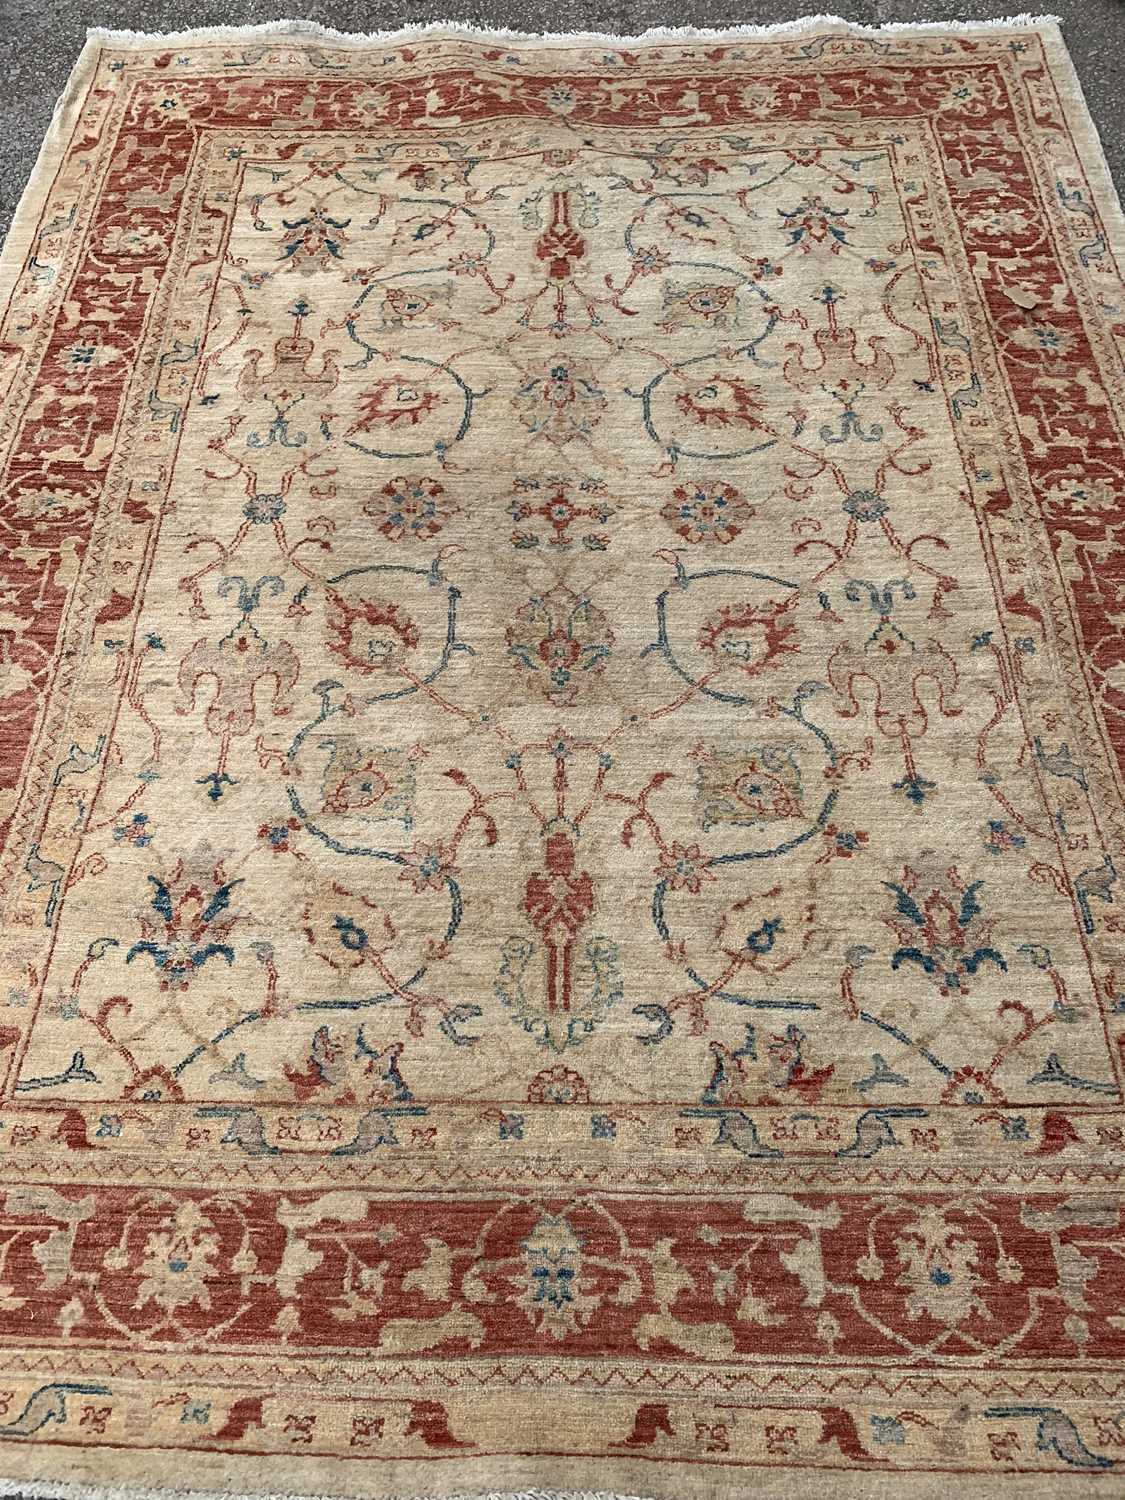 ANTIQUE EASTERN STYLE WOOLLEN RUG - cream ground with a red border and multi-patterned throughout,